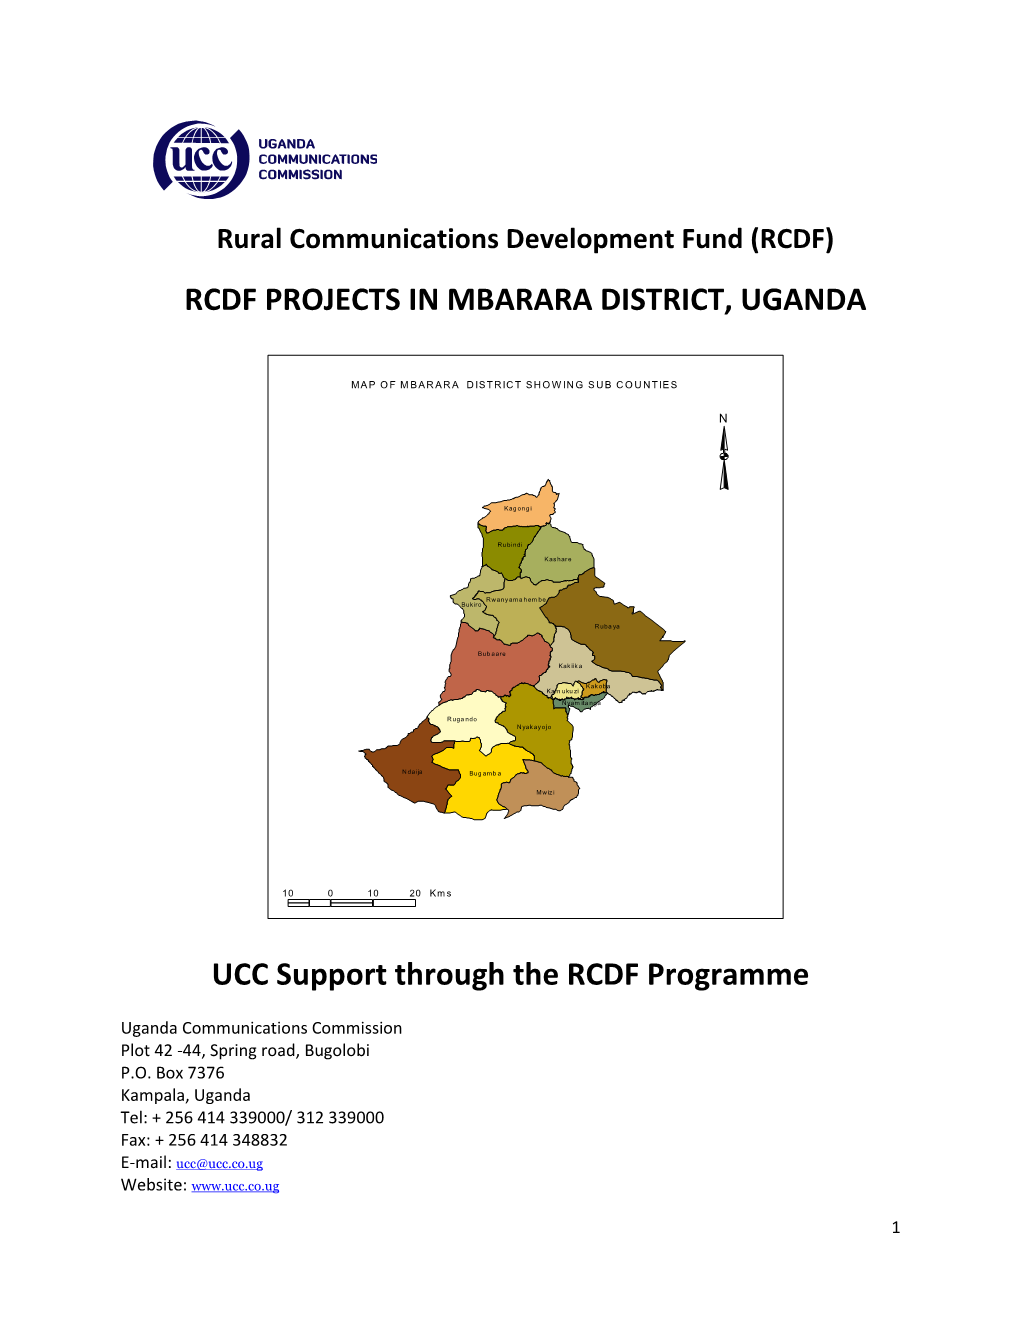 RCDF PROJECTS in MBARARA DISTRICT, UGANDA UCC Support